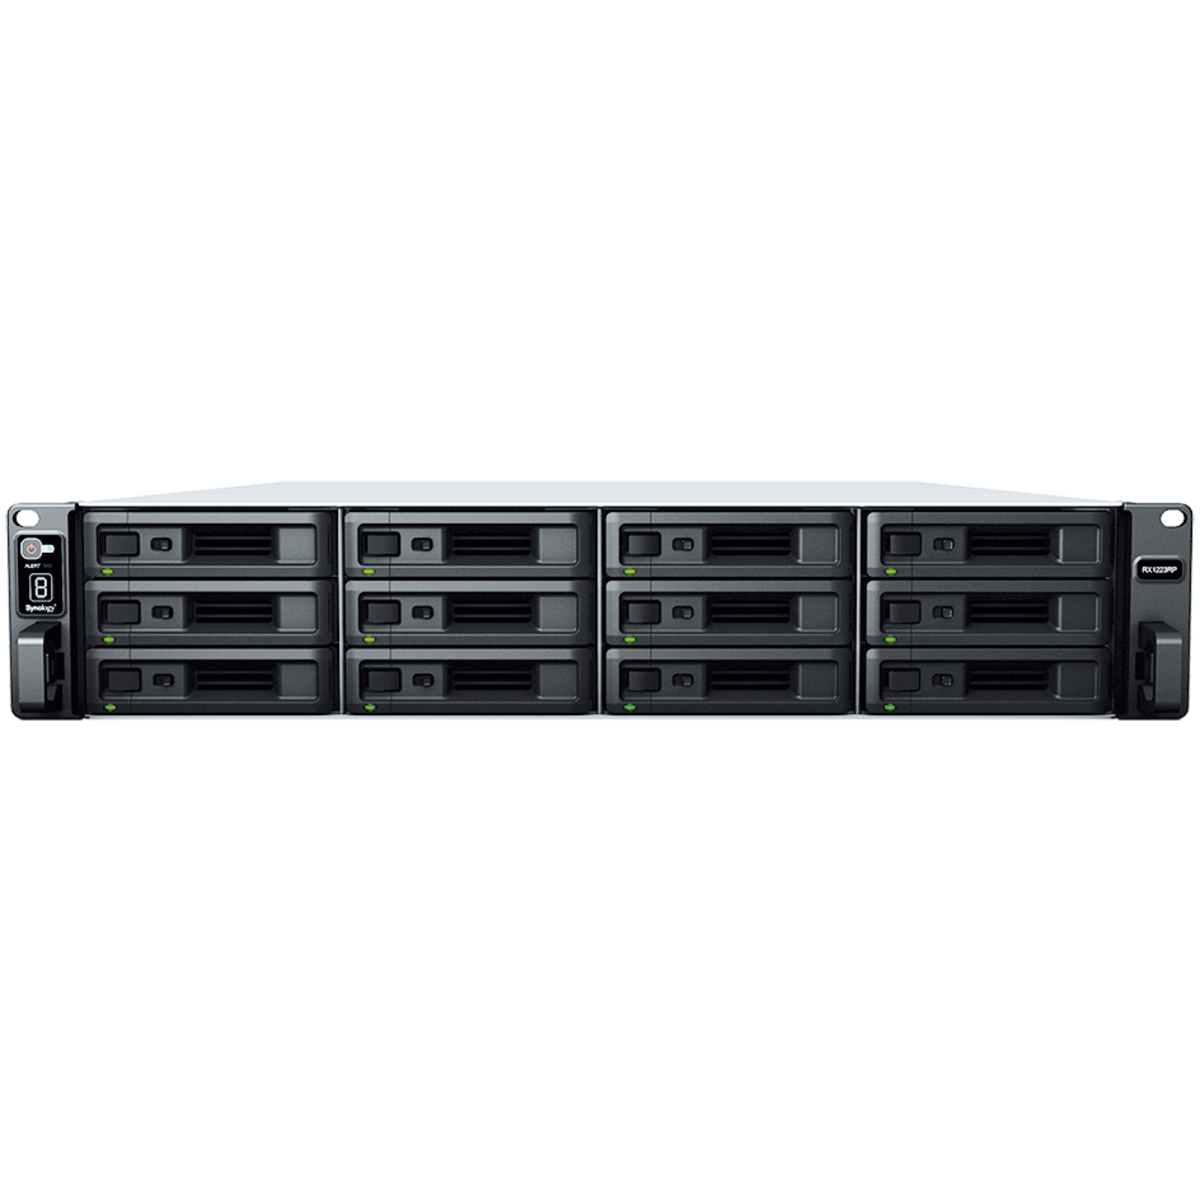 Synology RX1223RP External Expansion Drive 154tb 12-Bay RackMount Large Business / Enterprise Expansion Enclosure 7x22tb Toshiba Enterprise Capacity MG10AFA22TE 3.5 7200rpm SATA 6Gb/s HDD ENTERPRISE Class Drives Installed - Burn-In Tested RX1223RP External Expansion Drive